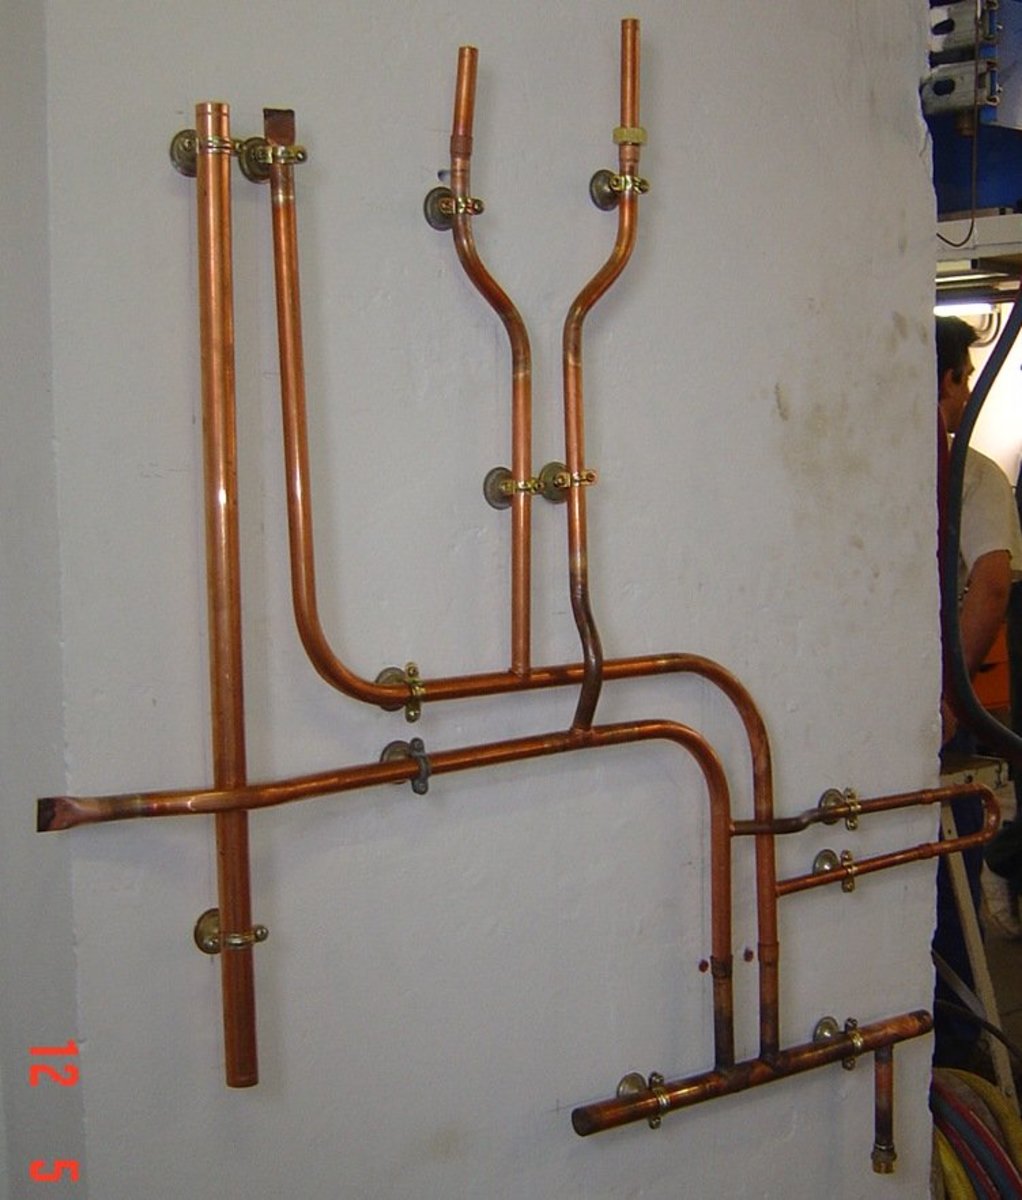 How to Bend a Copper Pipe With and Without Plumbing Tools - Dengarden